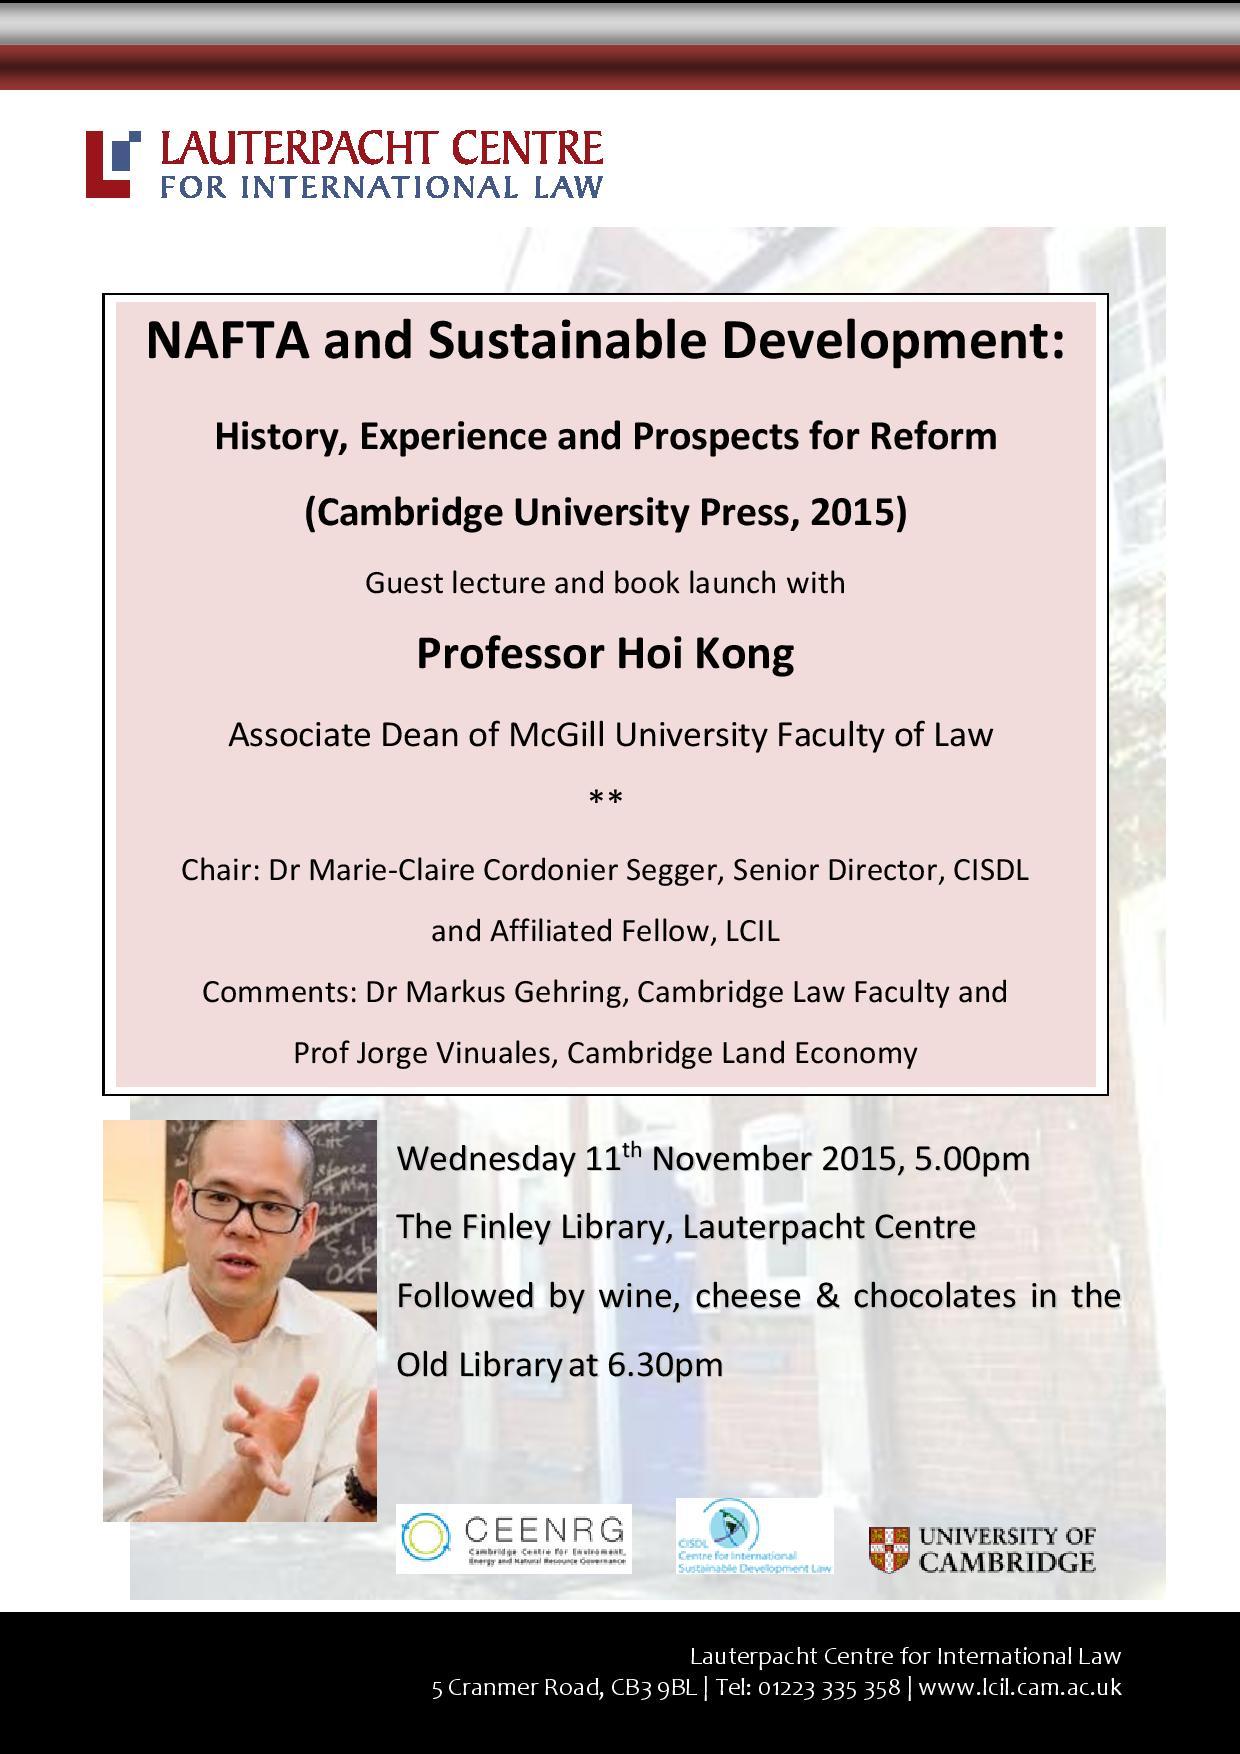 NAFTA and Sustainable Development:  History, Experience and Prospects for Reform - 5pm LCIL (5 Cranmer Rd) 11 Nov 2015